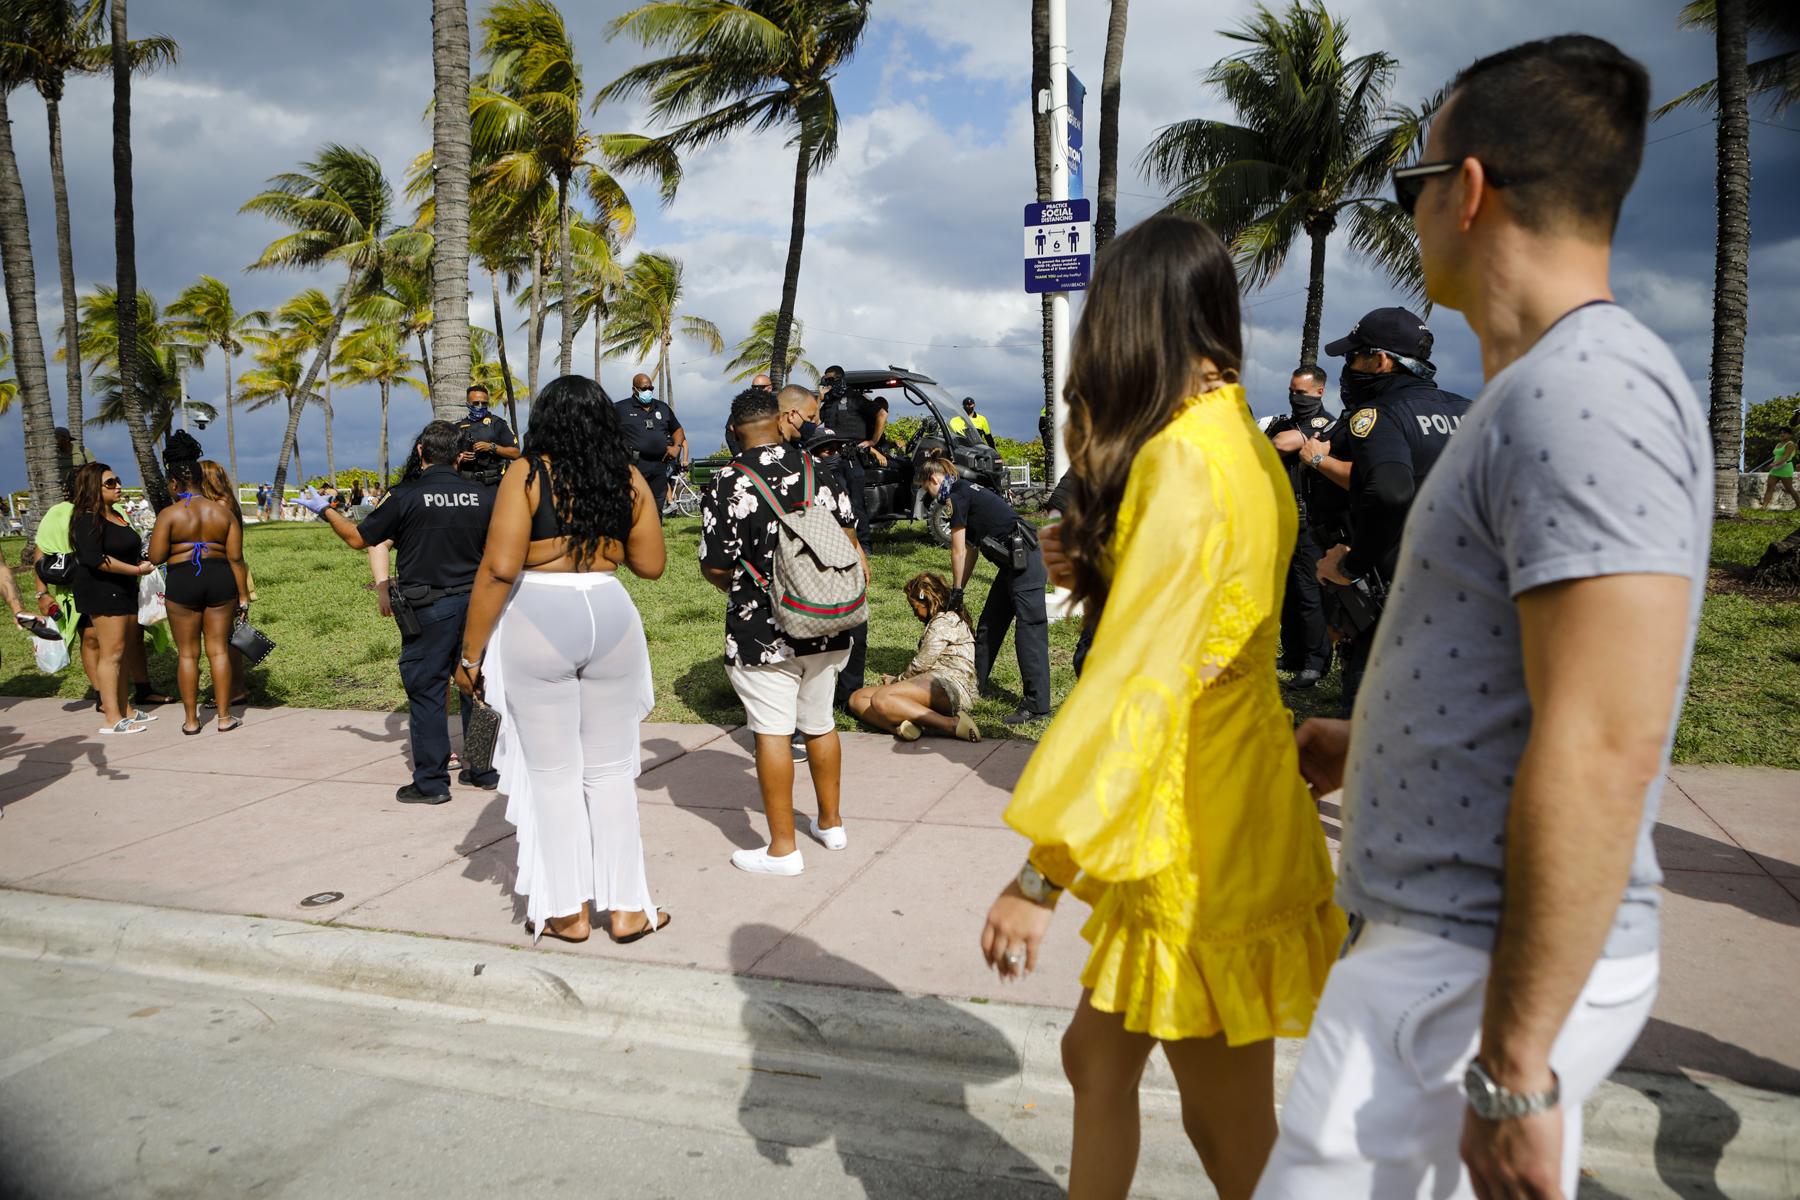 2021 - Spring Break @ Miami Beach - Police officers help a woman during Spring Break in Miami...